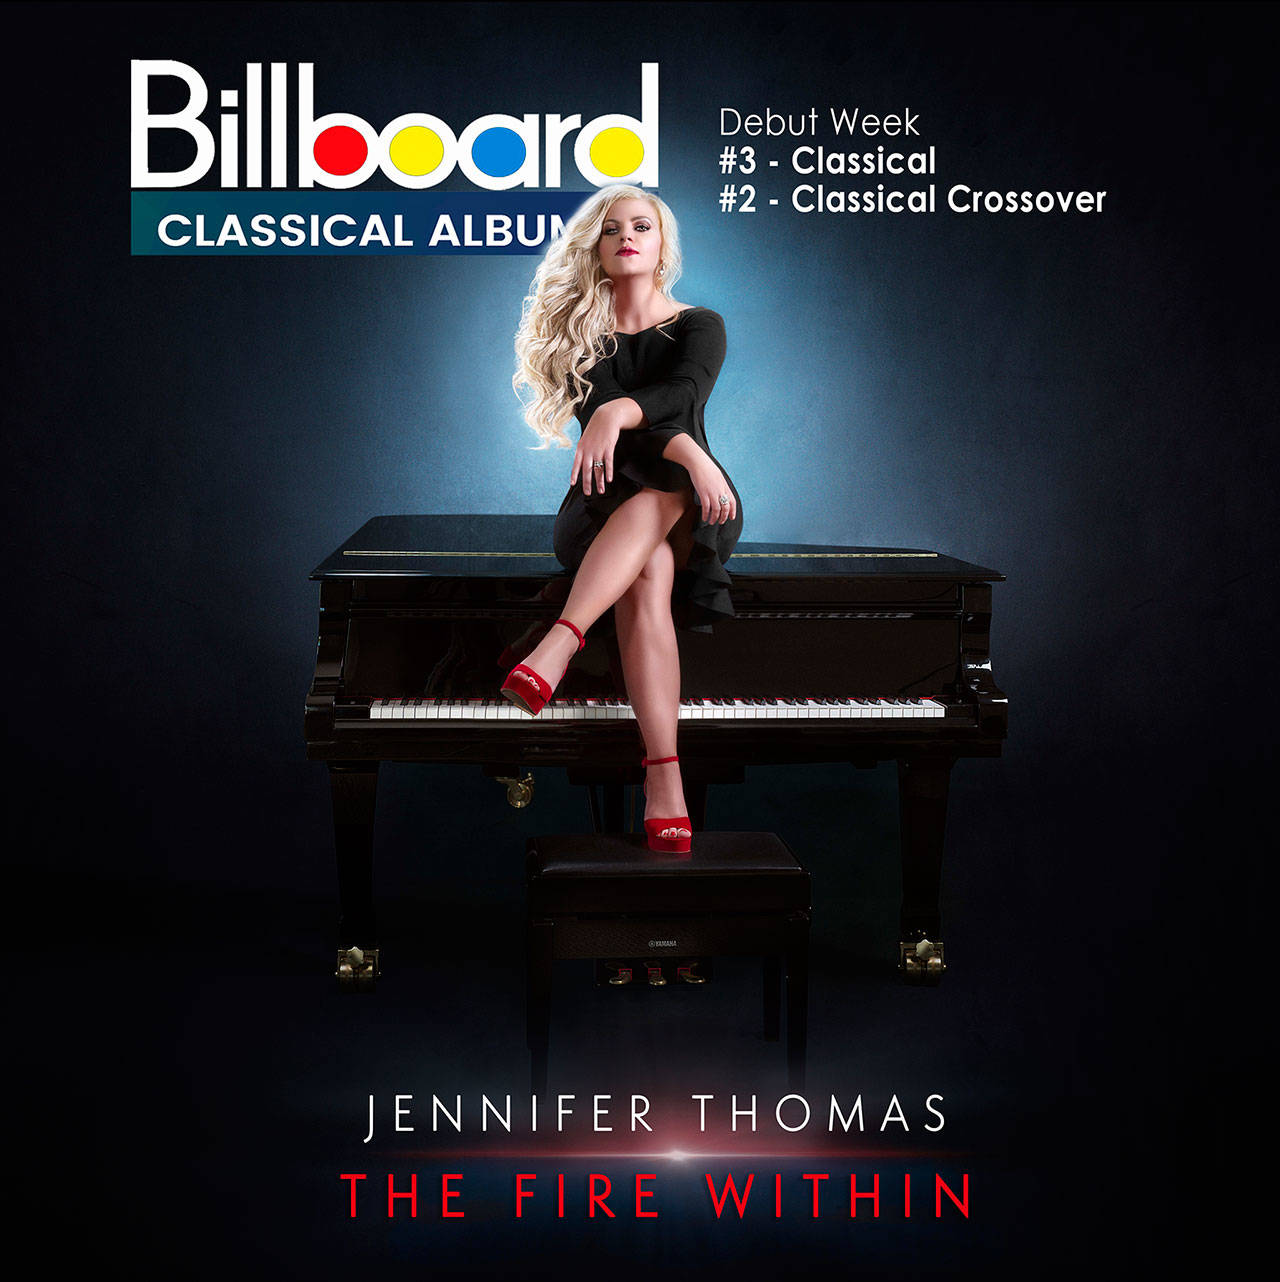 Jennifer Thomas’ newest album “The Fire Within” debuted in its first week on three Billboard charts — No. 3 Classical, No. 2 Classical Crossover, and No. 25 Heatseekers. Photo courtesy of Jennifer Thomas